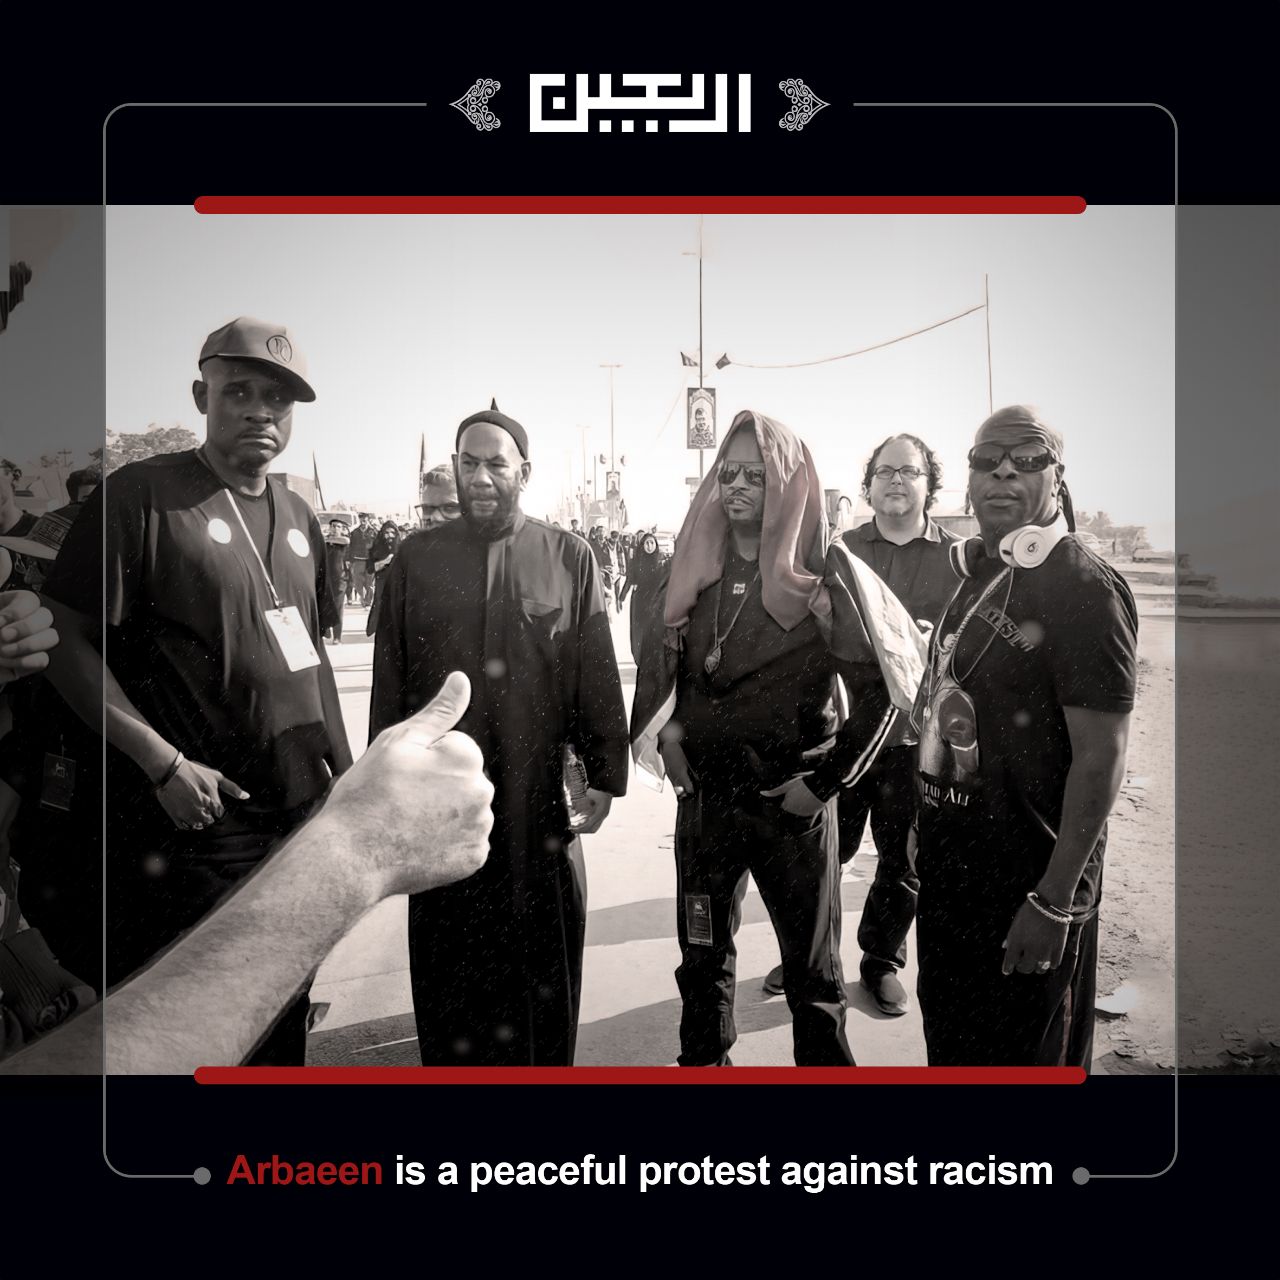 Arbaeen is a peaceful protest against racism